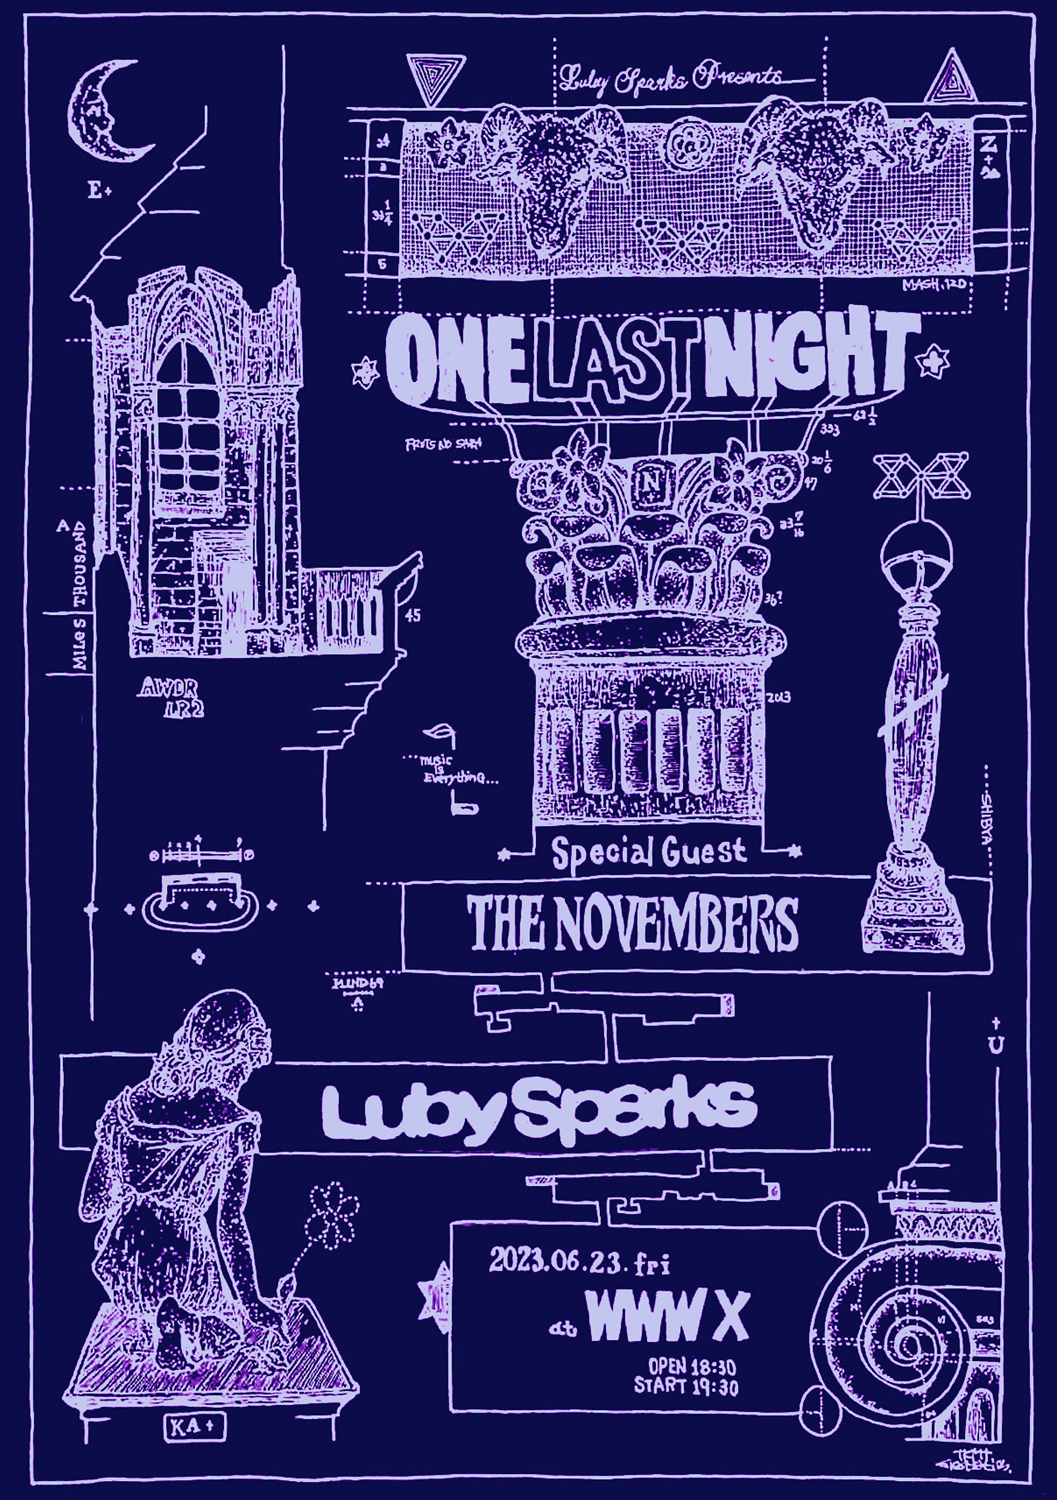 Luby Sparks Presents "One Last Night"